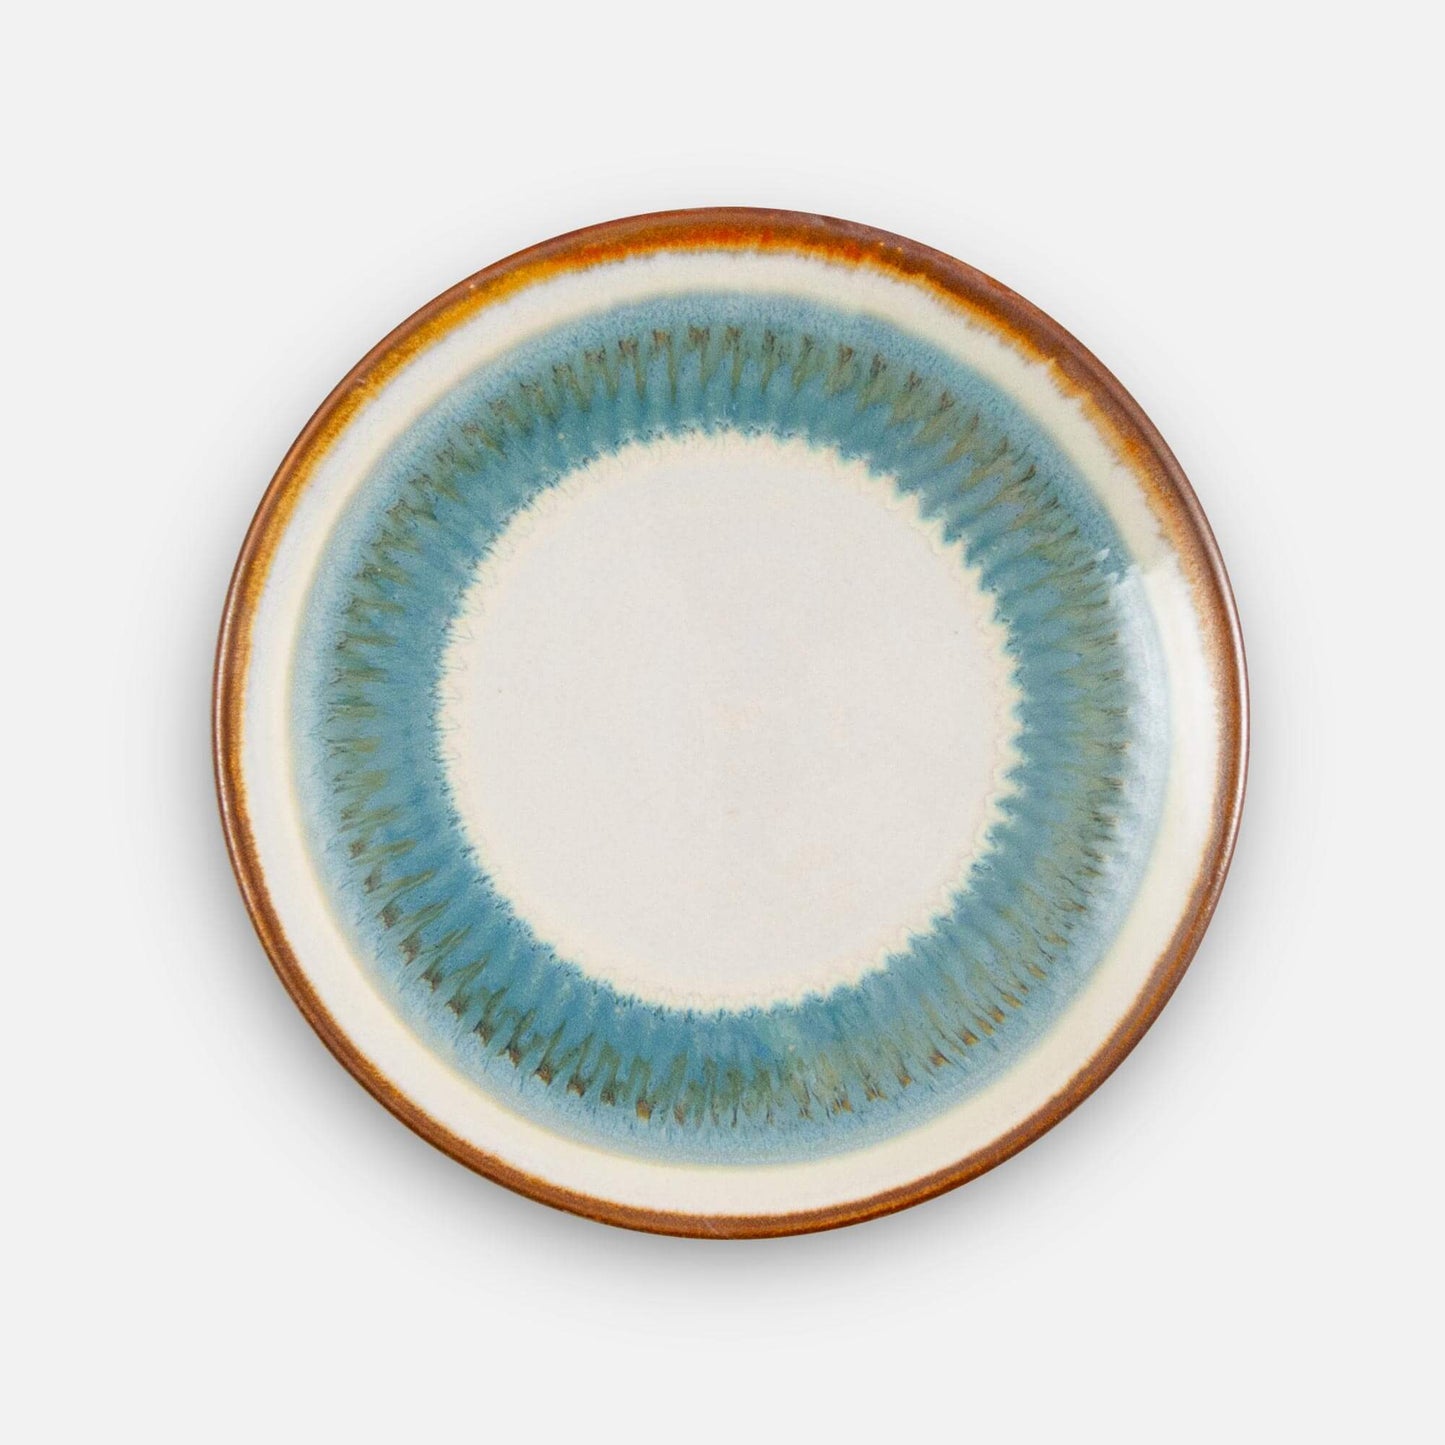 Handmade Pottery Footed Dessert Plate in Ivory & Blue pattern made by Georgetown Pottery in Maine